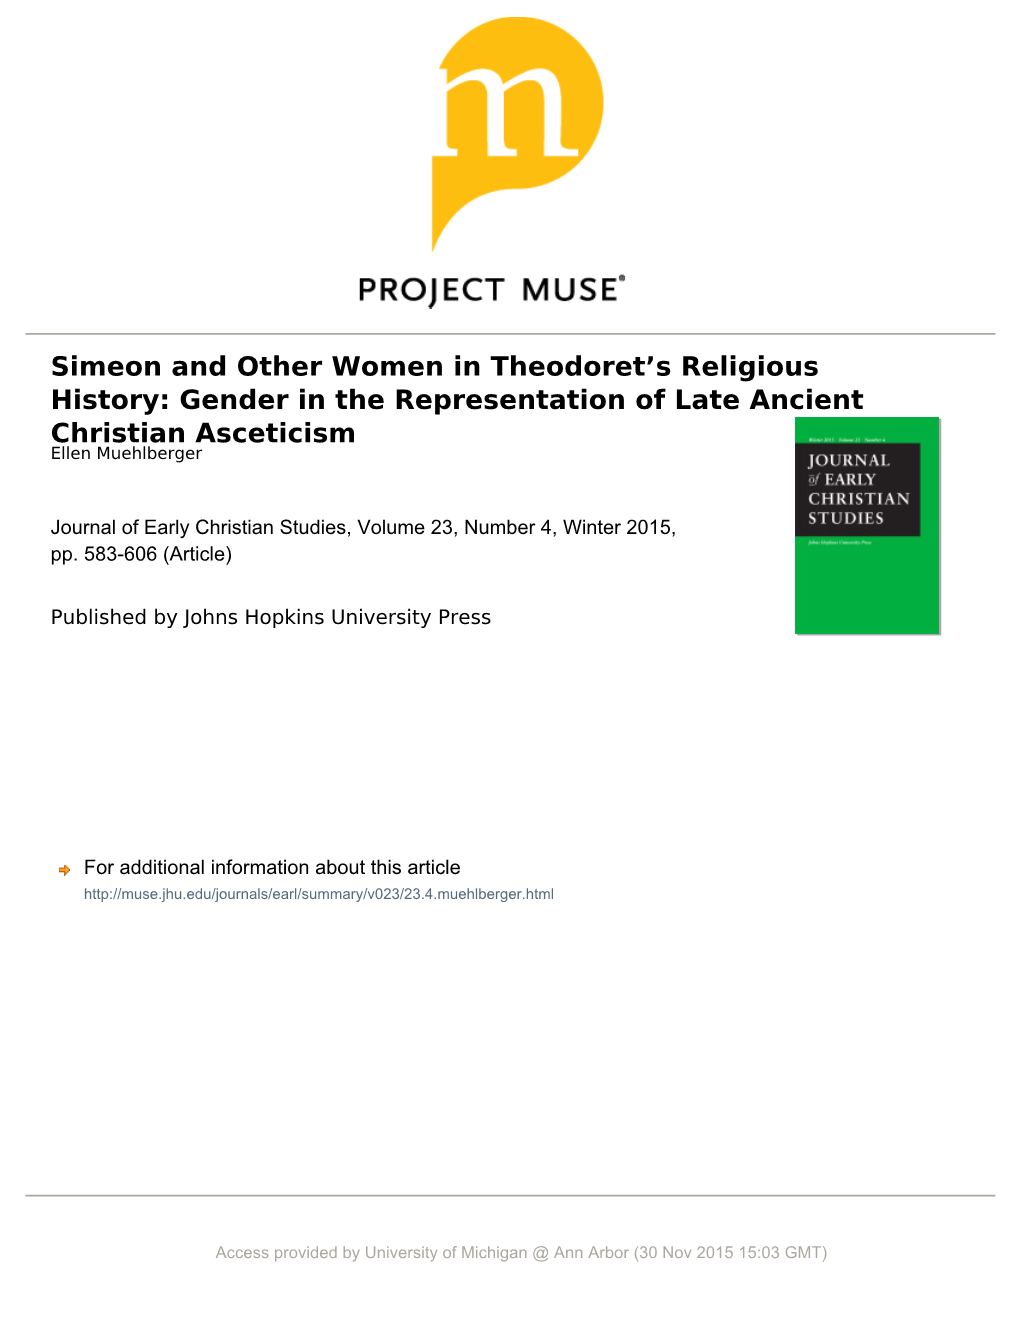 Simeon and Other Women in Theodoretʼs Religious History: Gender in the Representation of Late Ancient Christian Asceticism